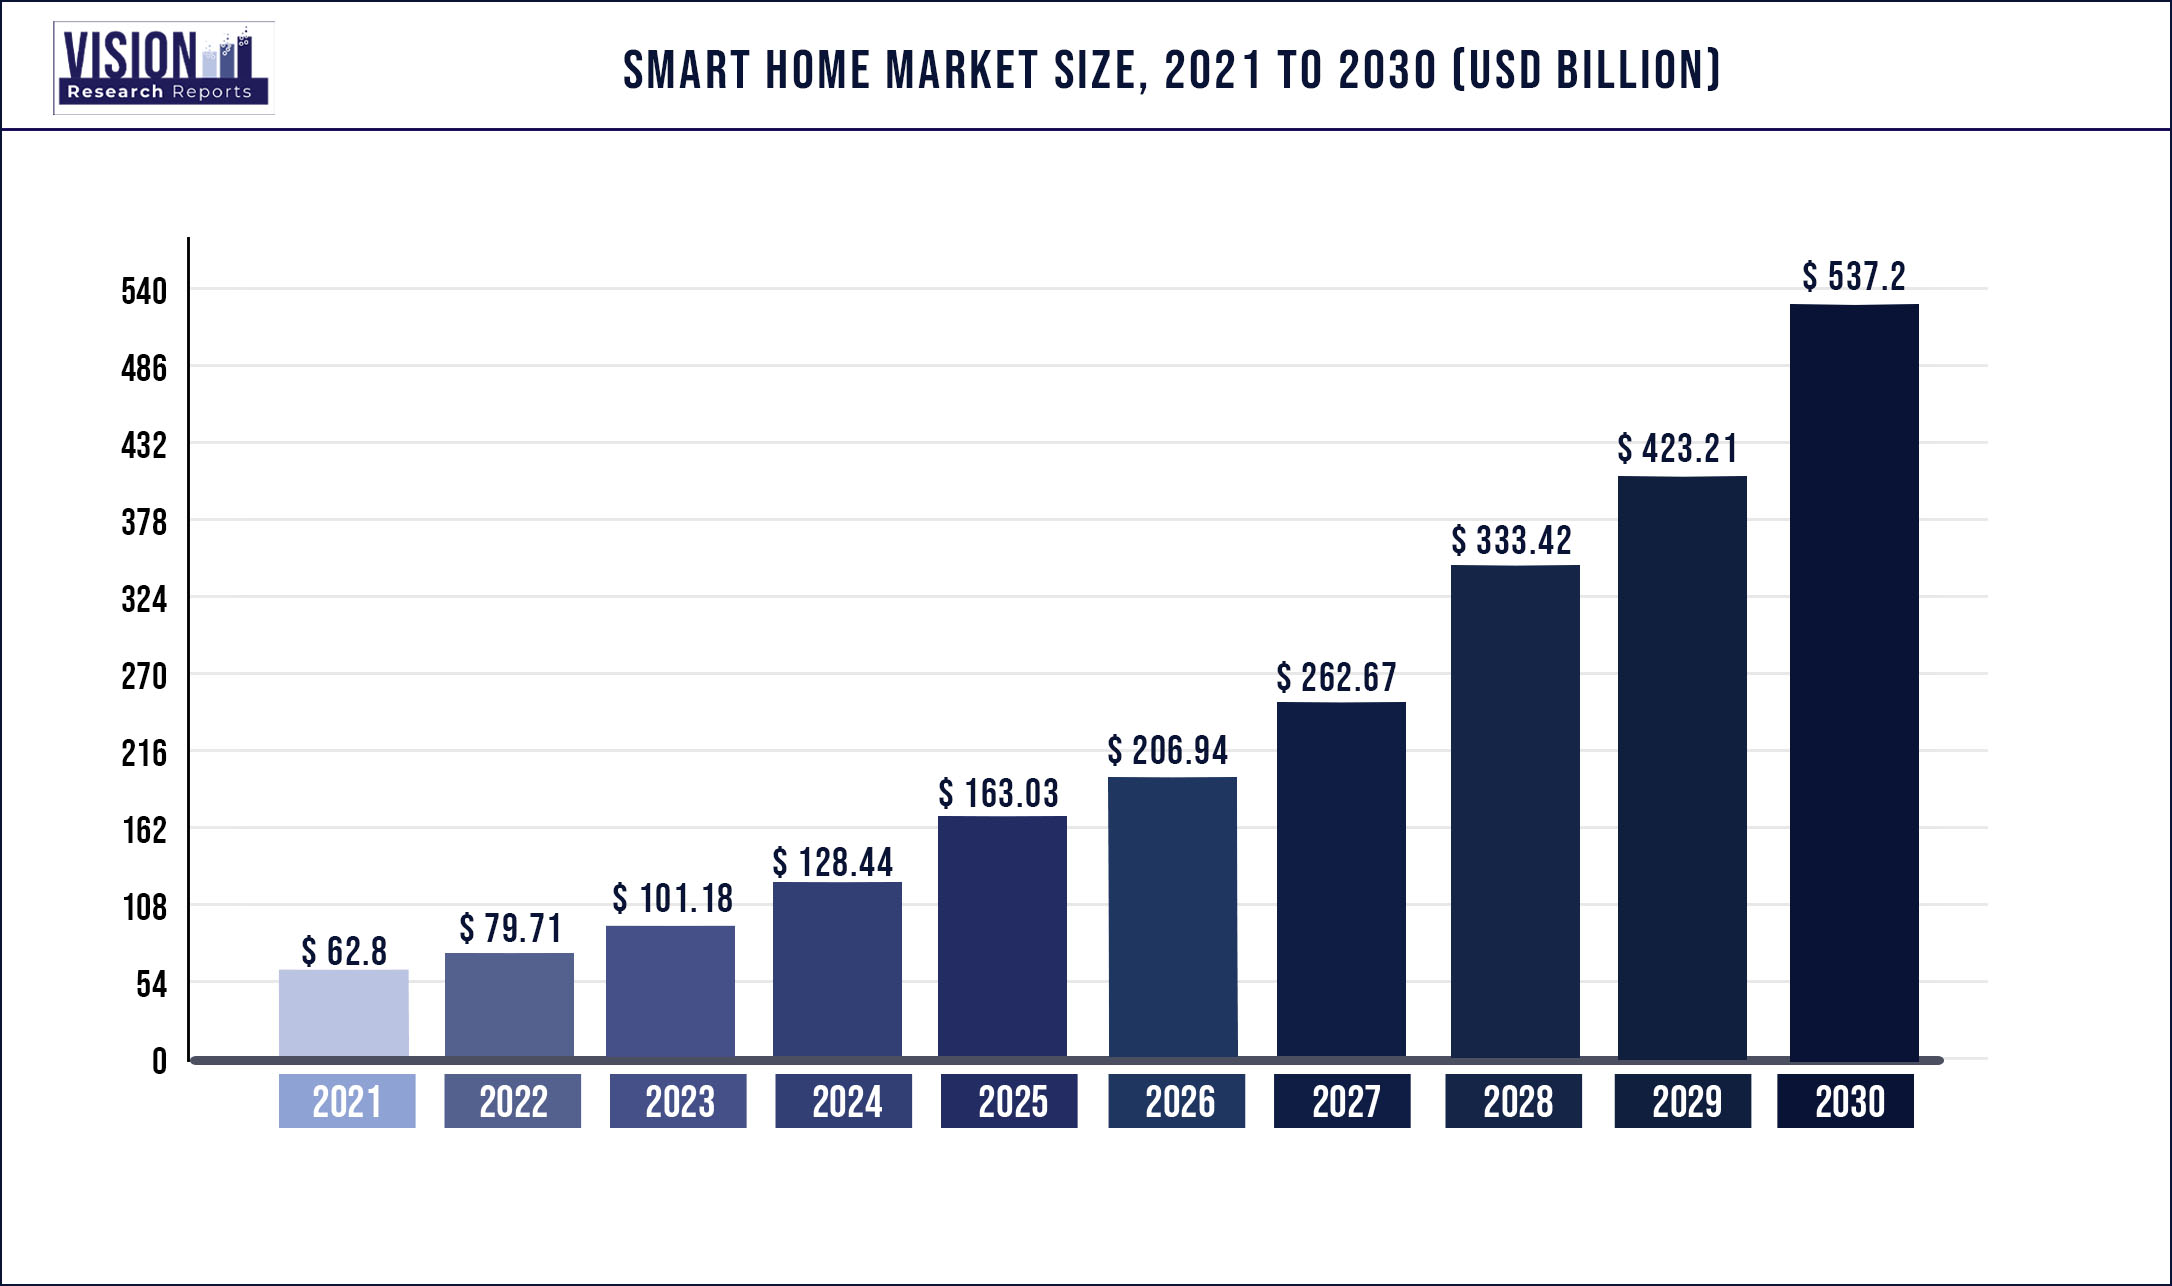 Smart Home Market Size 2021 to 2030